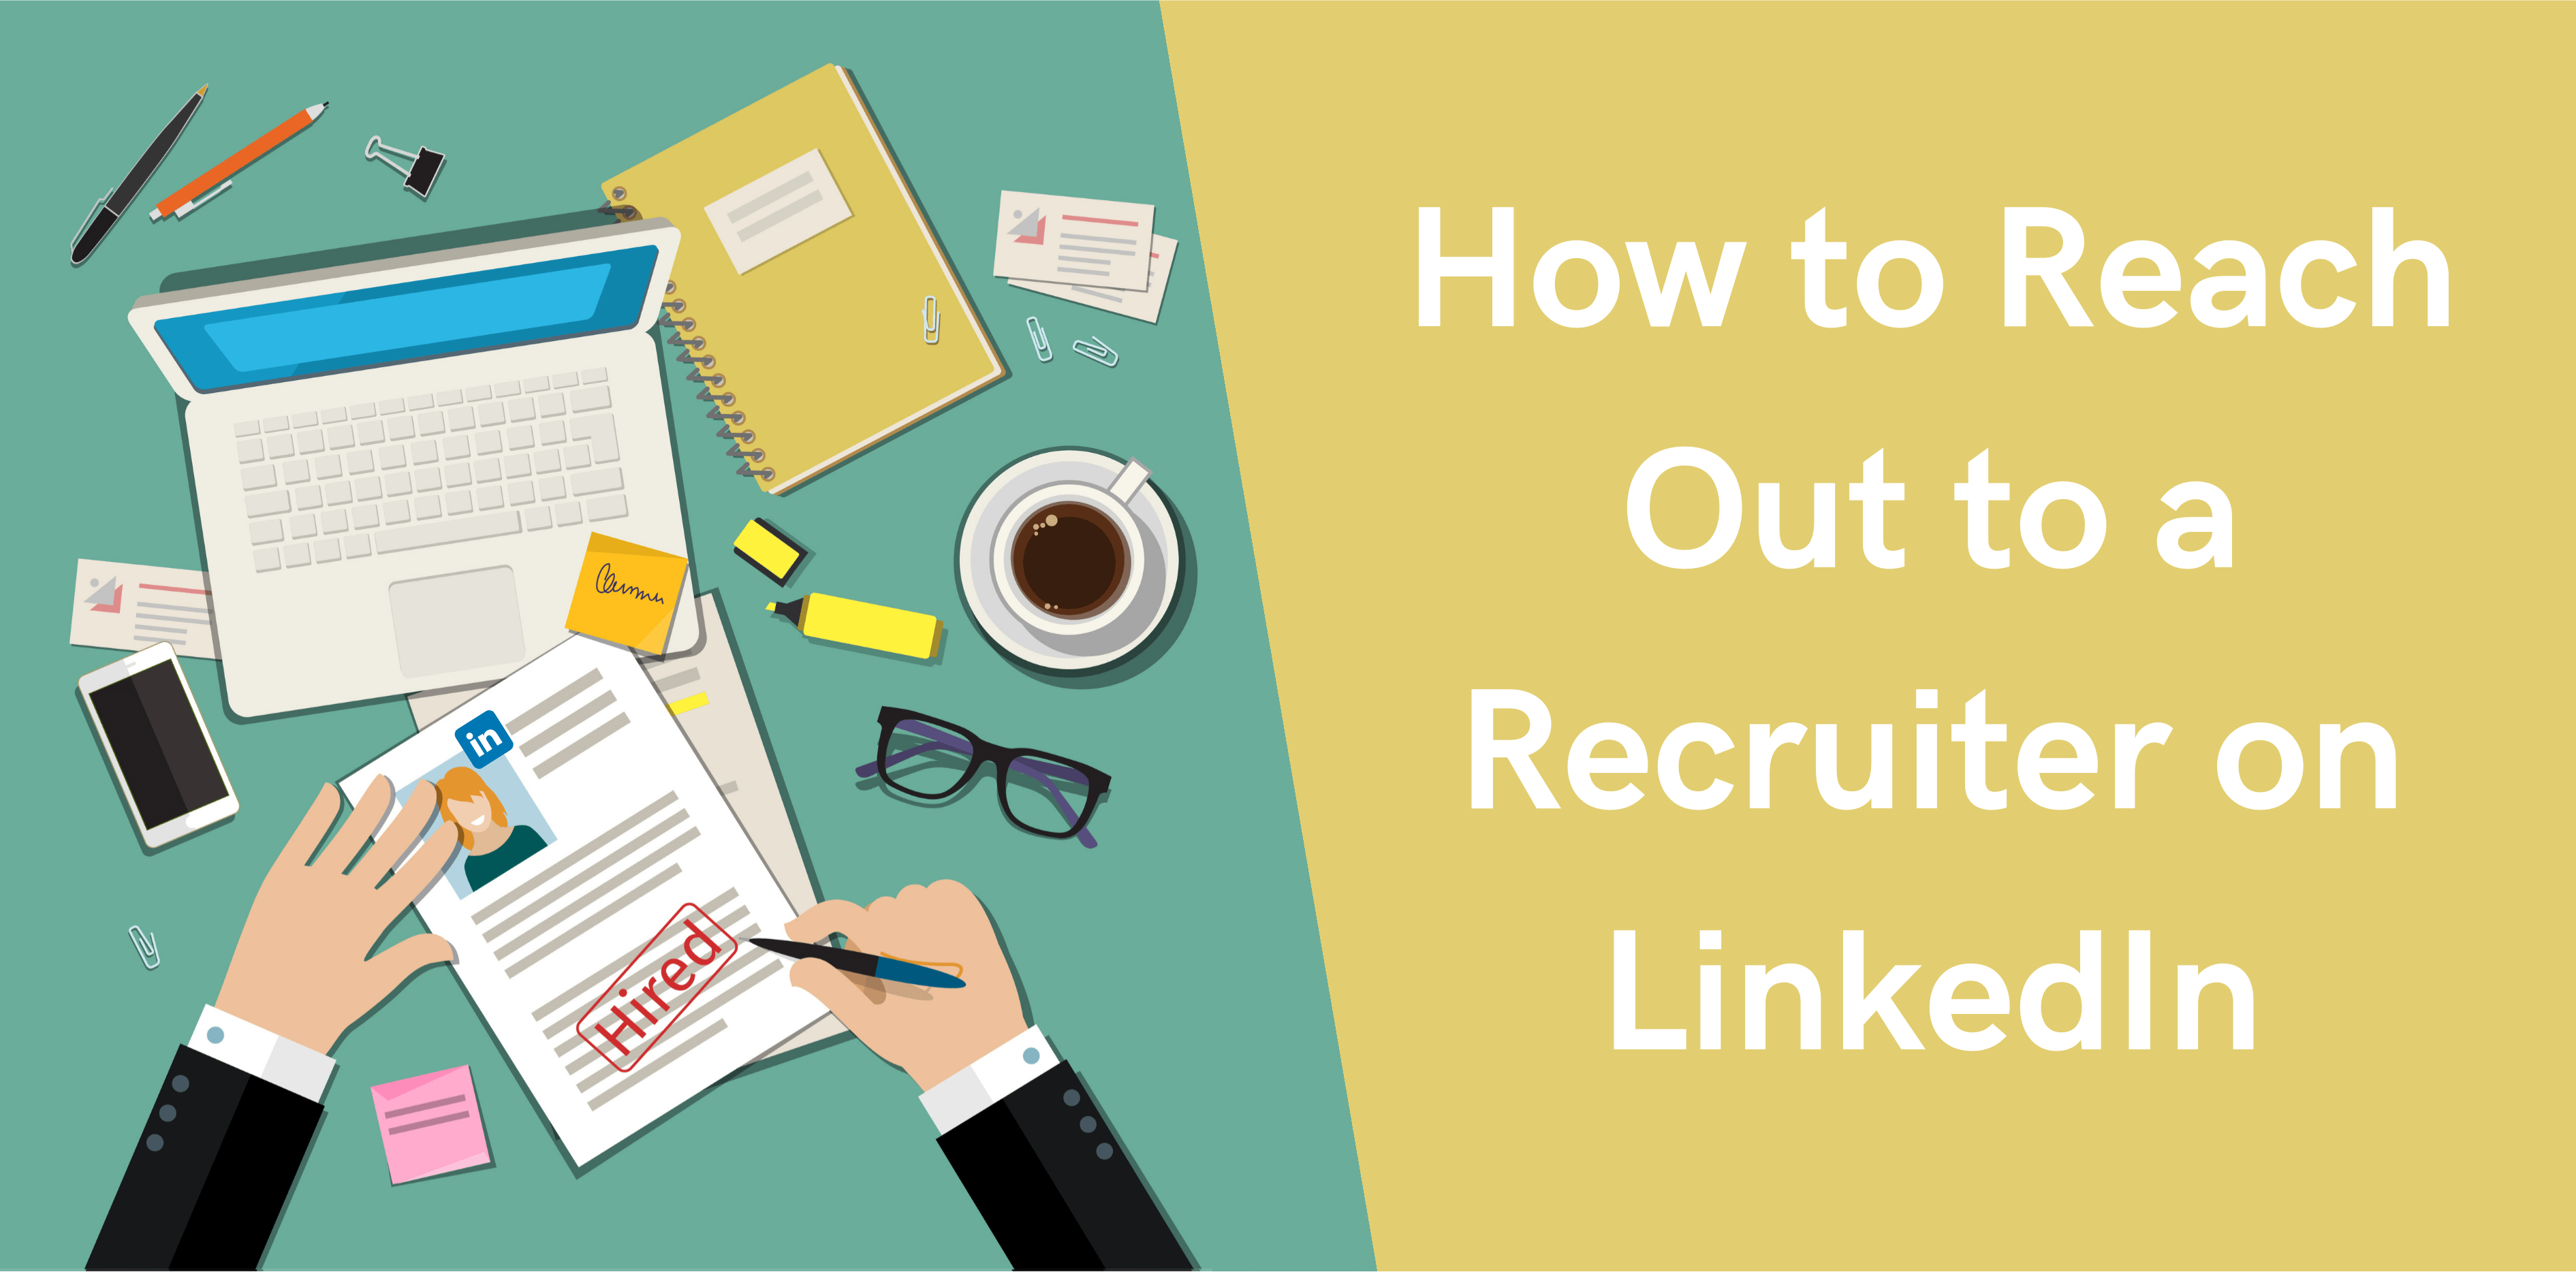 How-to-Reach-Out-to-a-Recruiter-on-LinkedIn